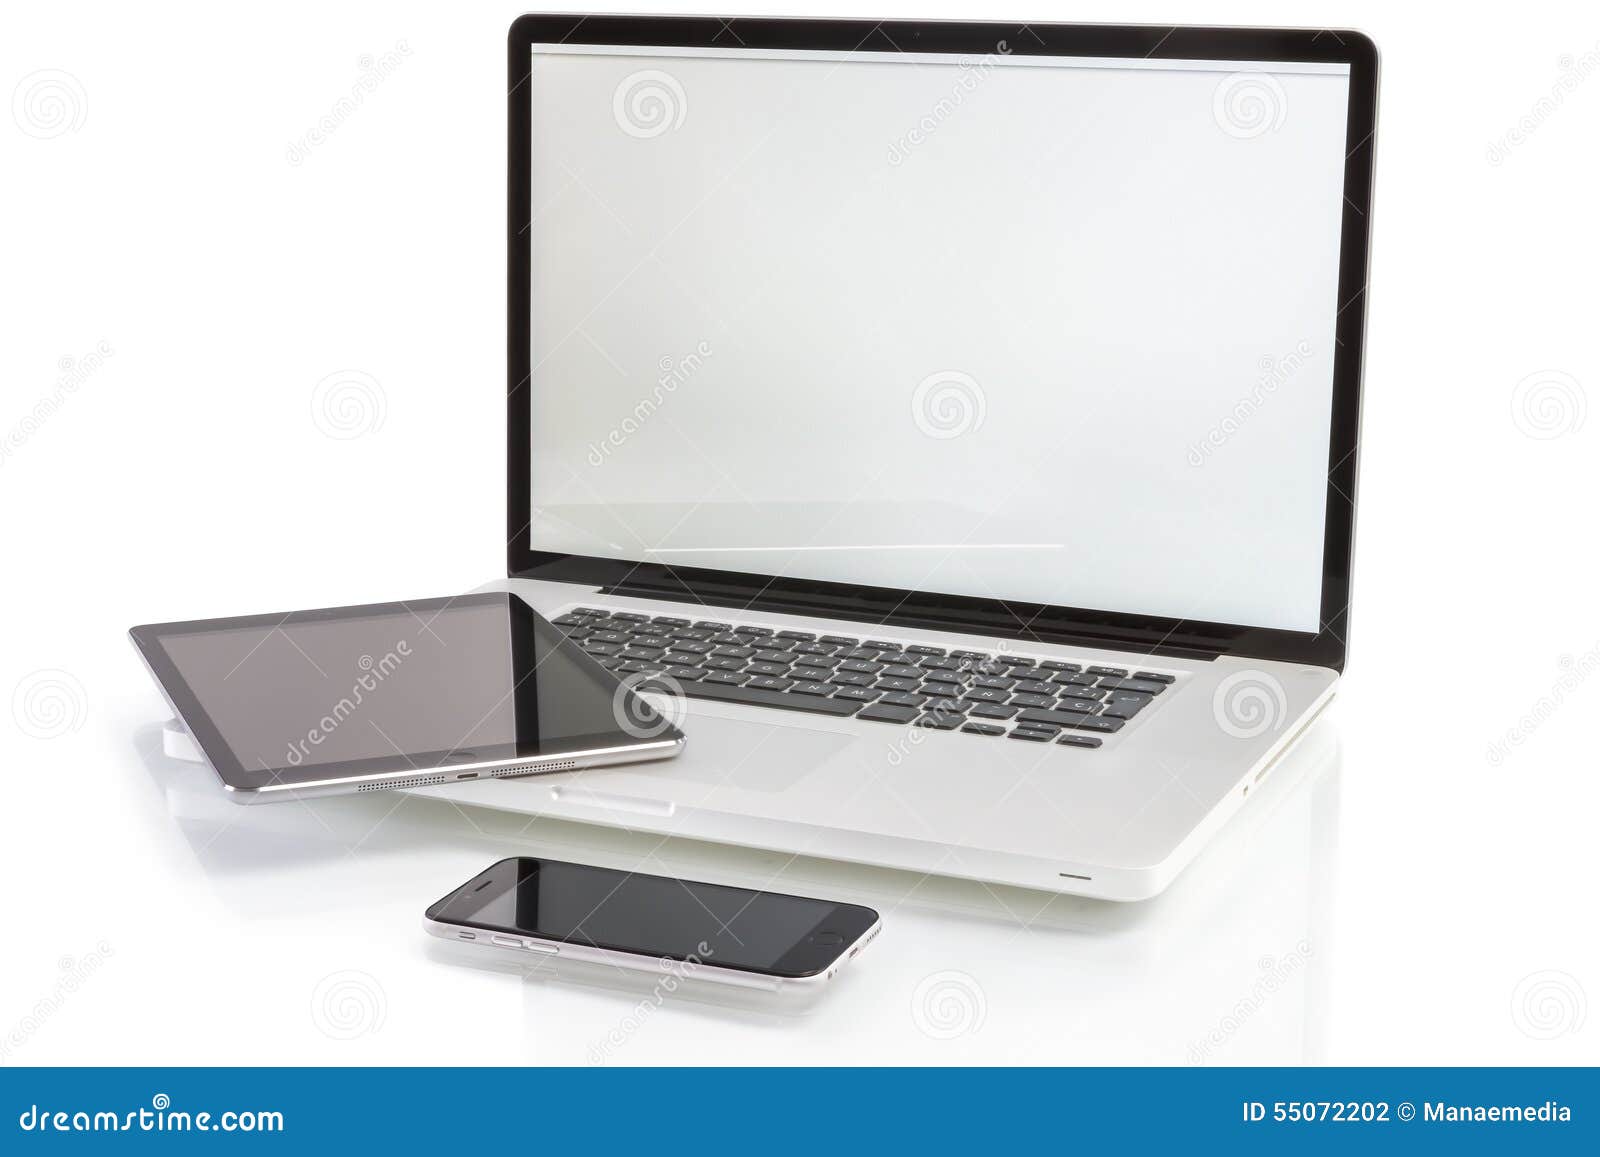 modern computer devices - laptop, tablet pc and smartphone